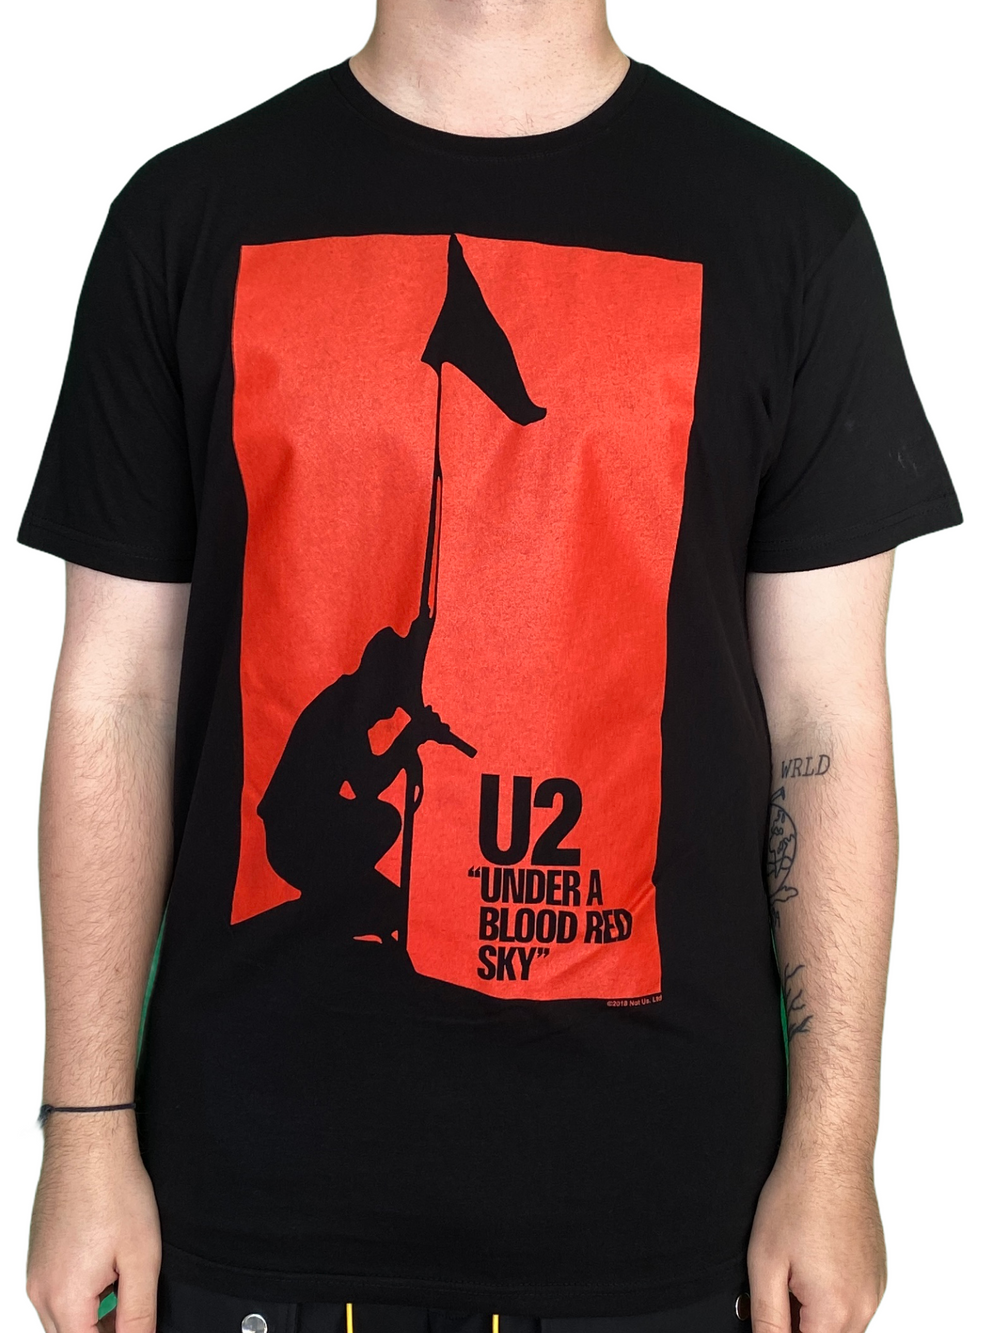 U2 Blood Red Sky Official T Shirt Brand New Various Sizes